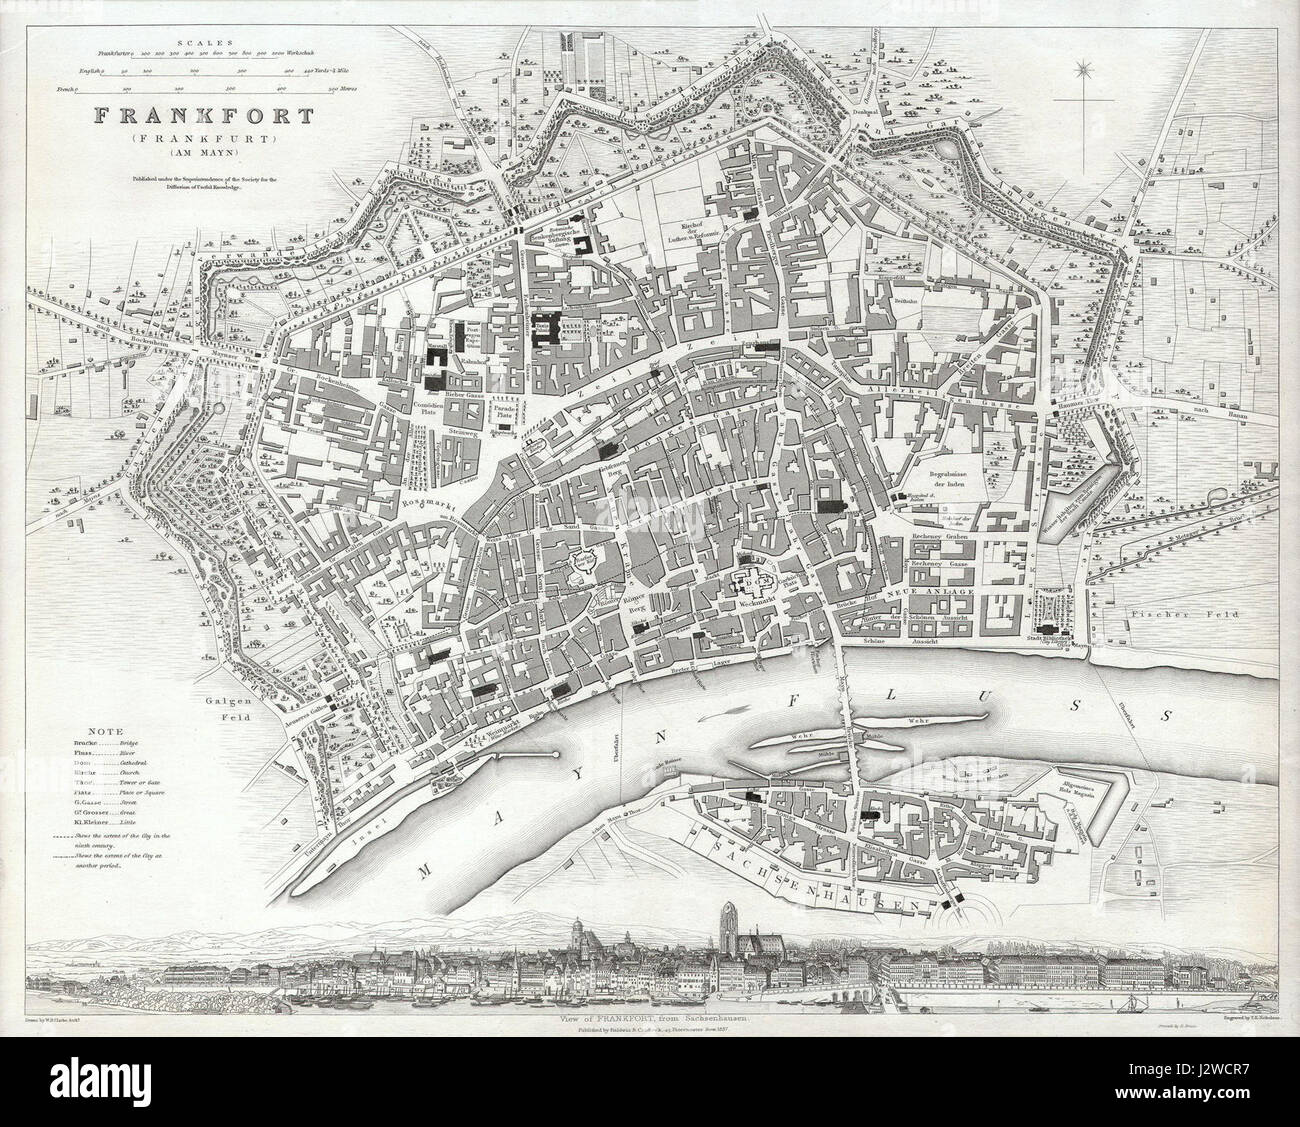 1837 S.D.U.K. City Map or Plan of Frankfort, Germany - Geographicus - Frankfurt-SDUK-1837 Stock Photo